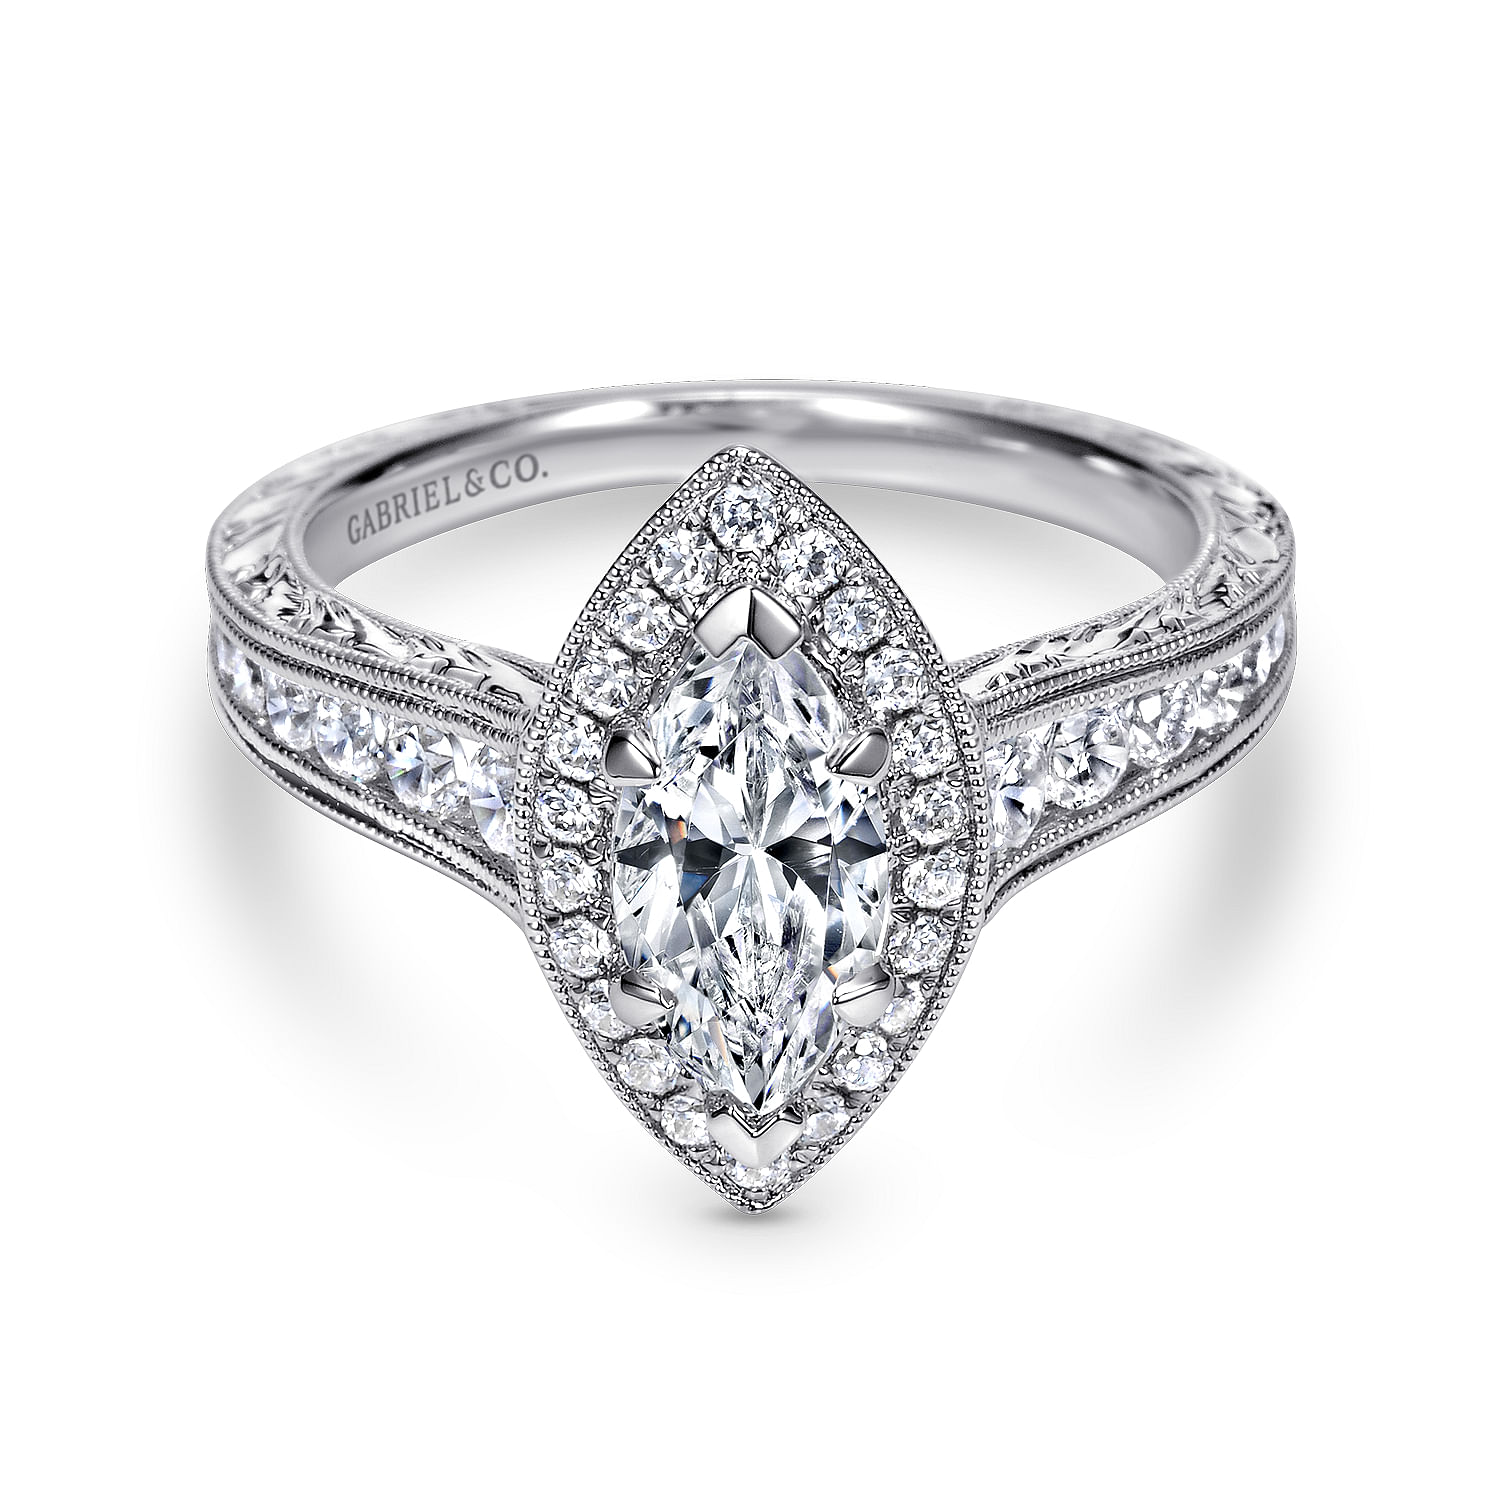 Leticia - Vintage Inspired 14K White Gold Marquise Halo Diamond Engagement Ring